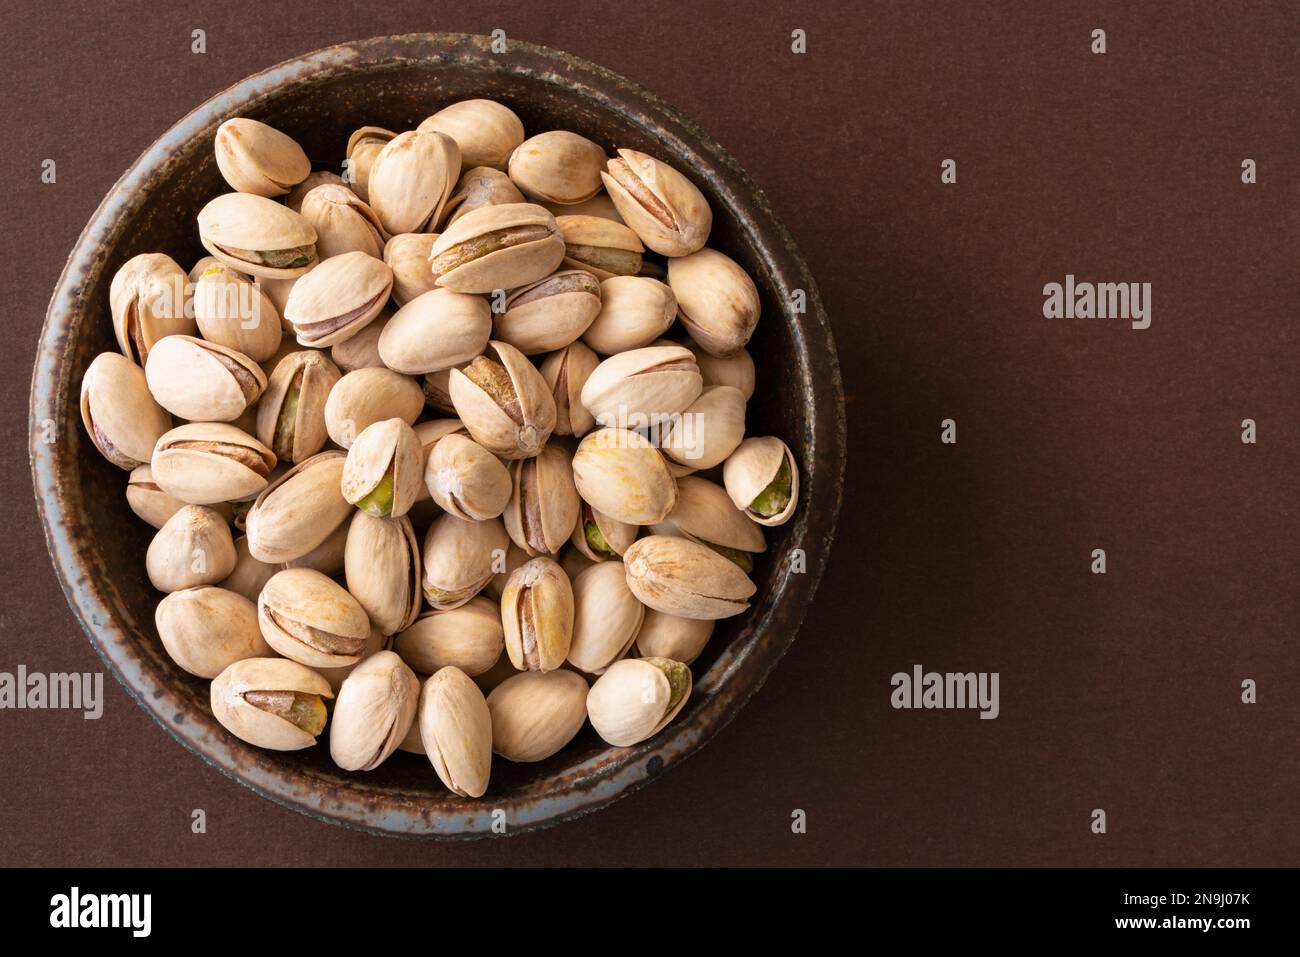 Roasted Salted Pistachios in a Bowl Stock Photo